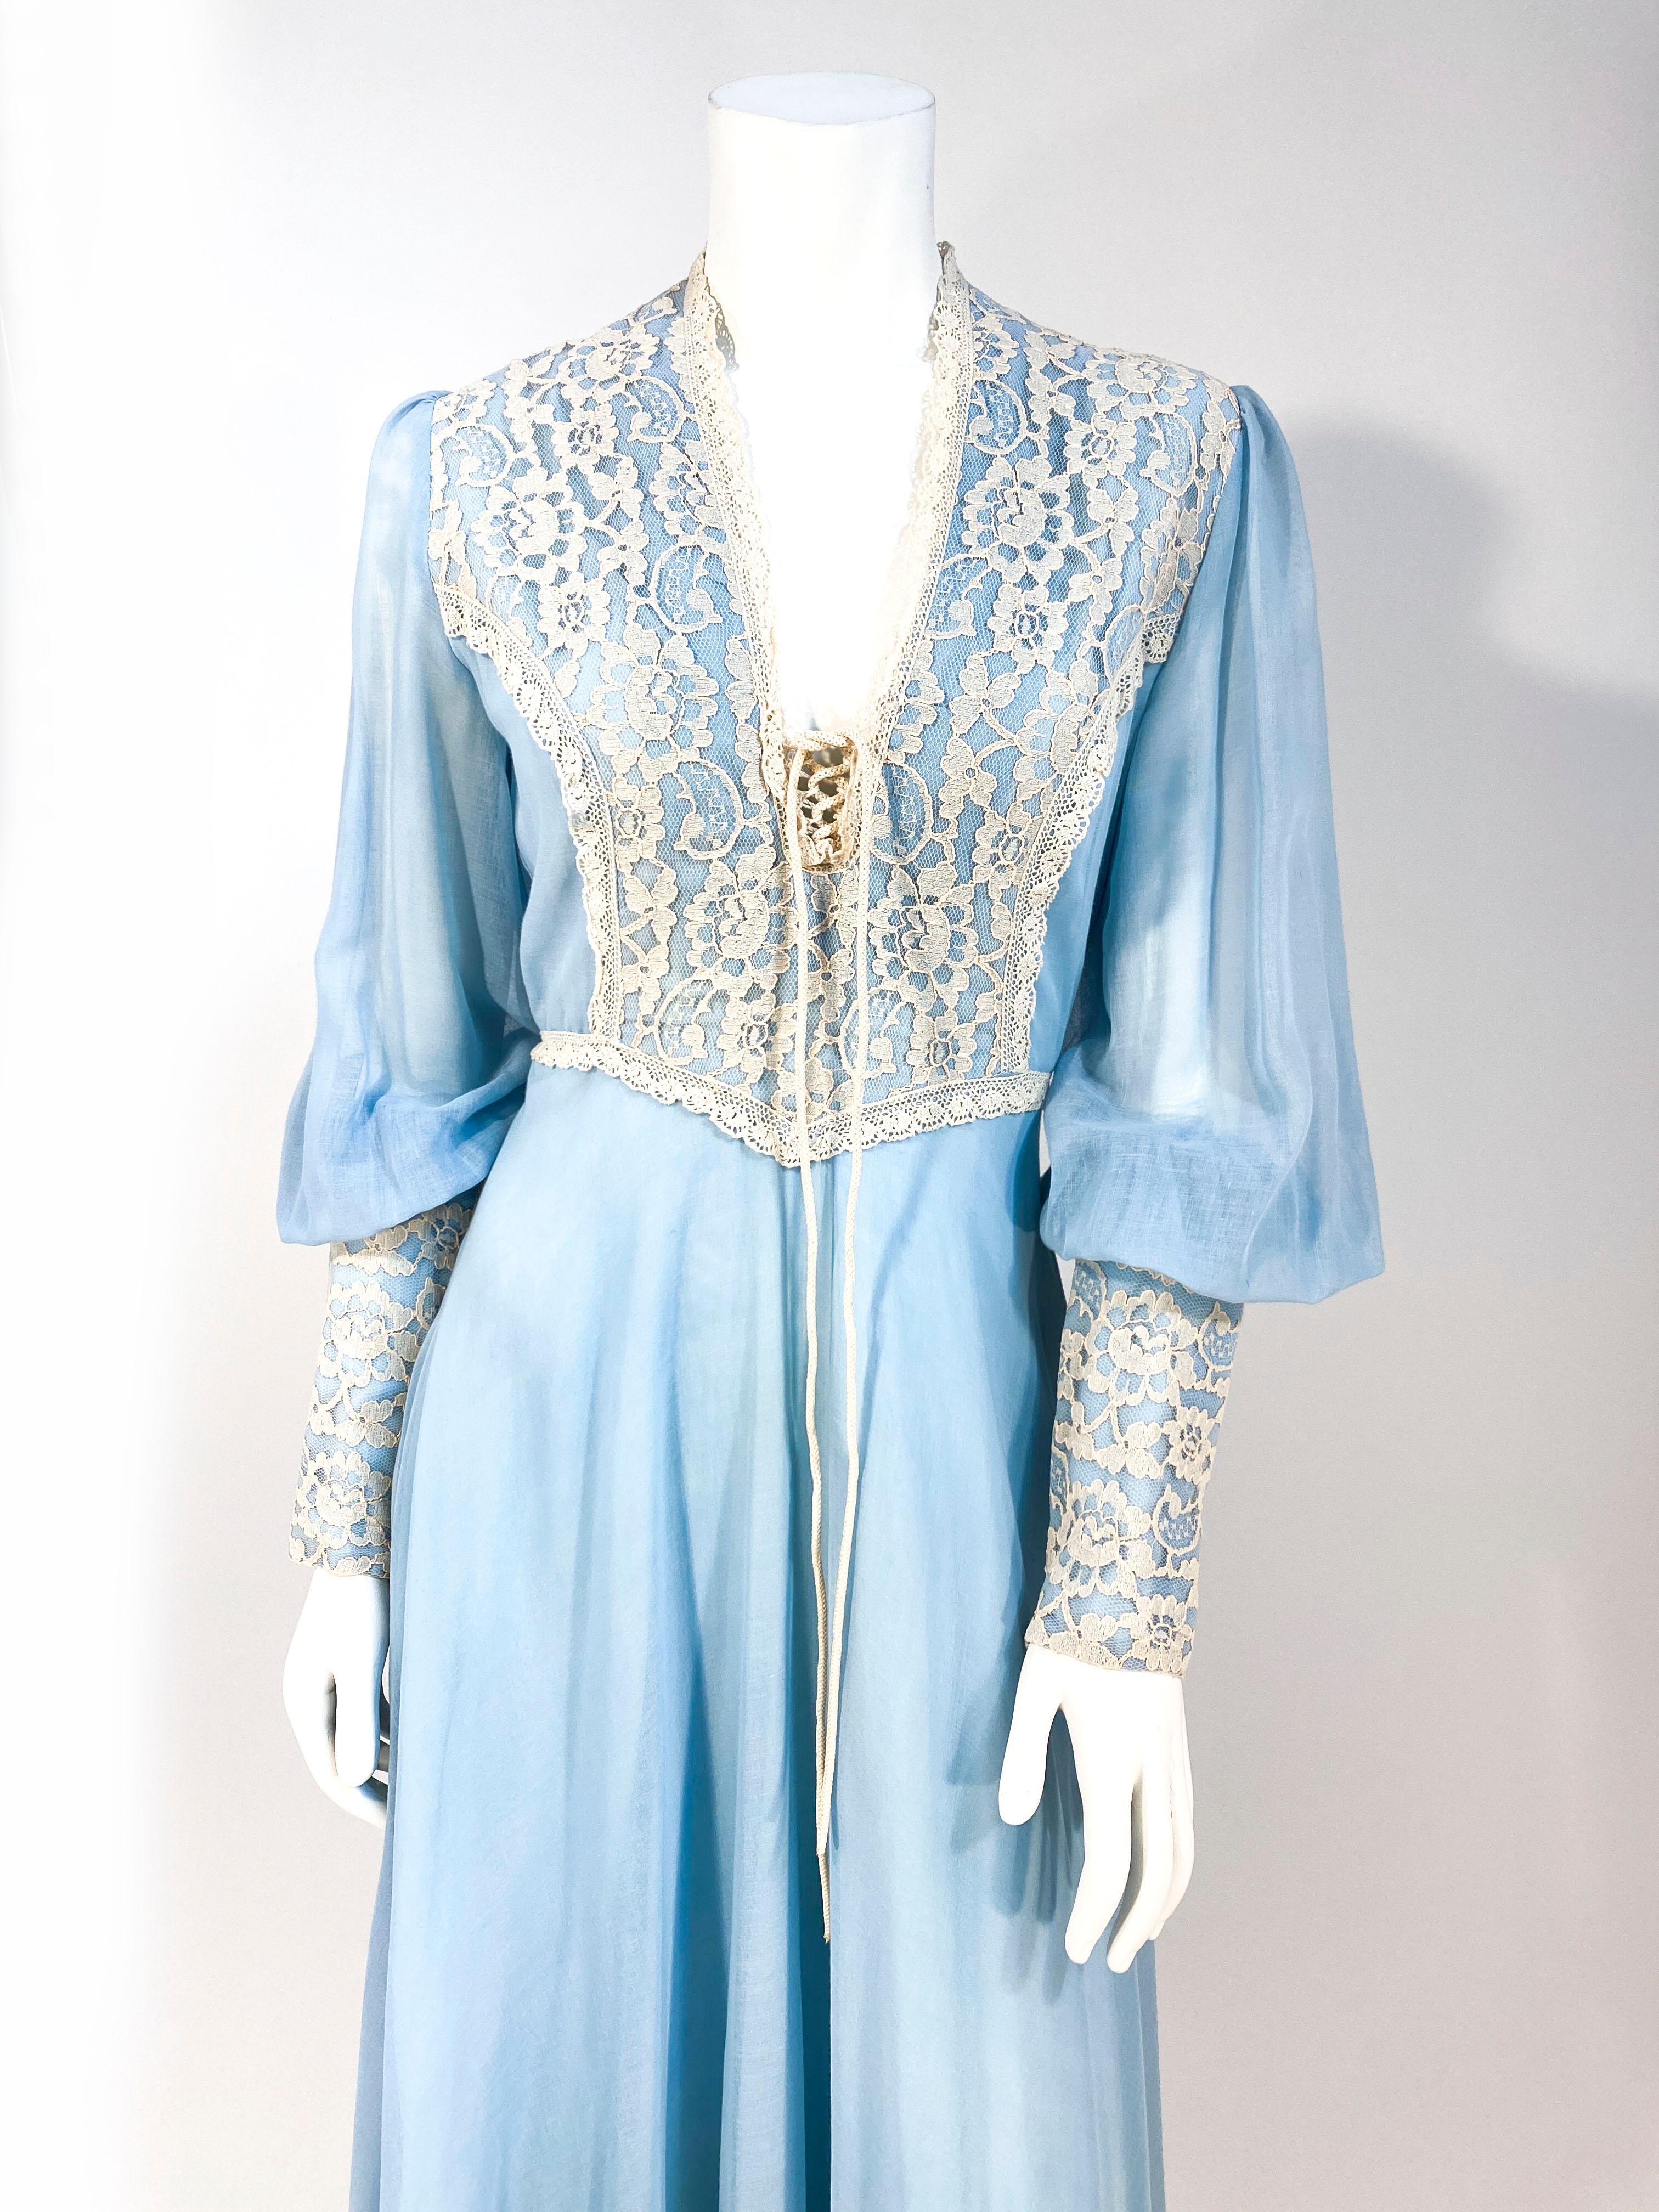 1970s sky blue full length cotton day dress with an ecru lace bodice and elongated cuffs. Each cuff has a long zip closure that allows for the bishop sleeves to have a full effect. The deep v-neckline has an adjustable cord closure. The bodice of